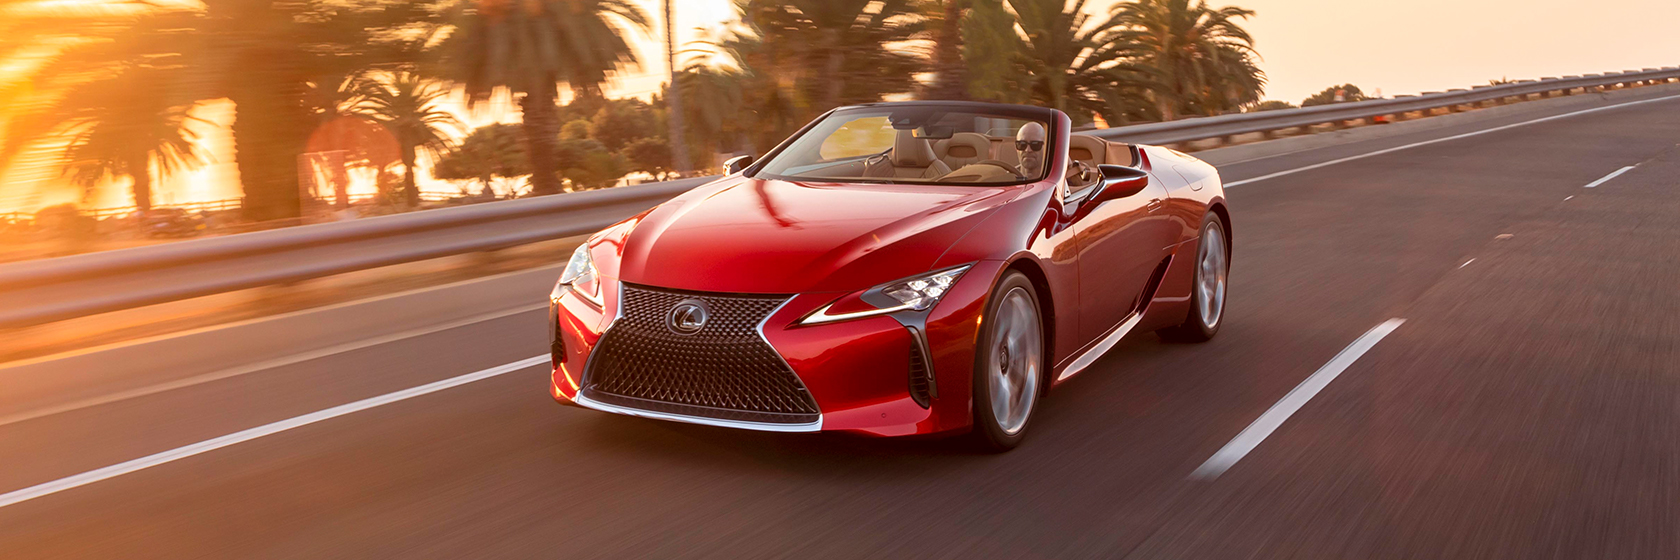 al-futtaim-lexus-expands-flagship-lc-family-with-the-uae-launch-of-first-ever-lexus-lc-500-convertible